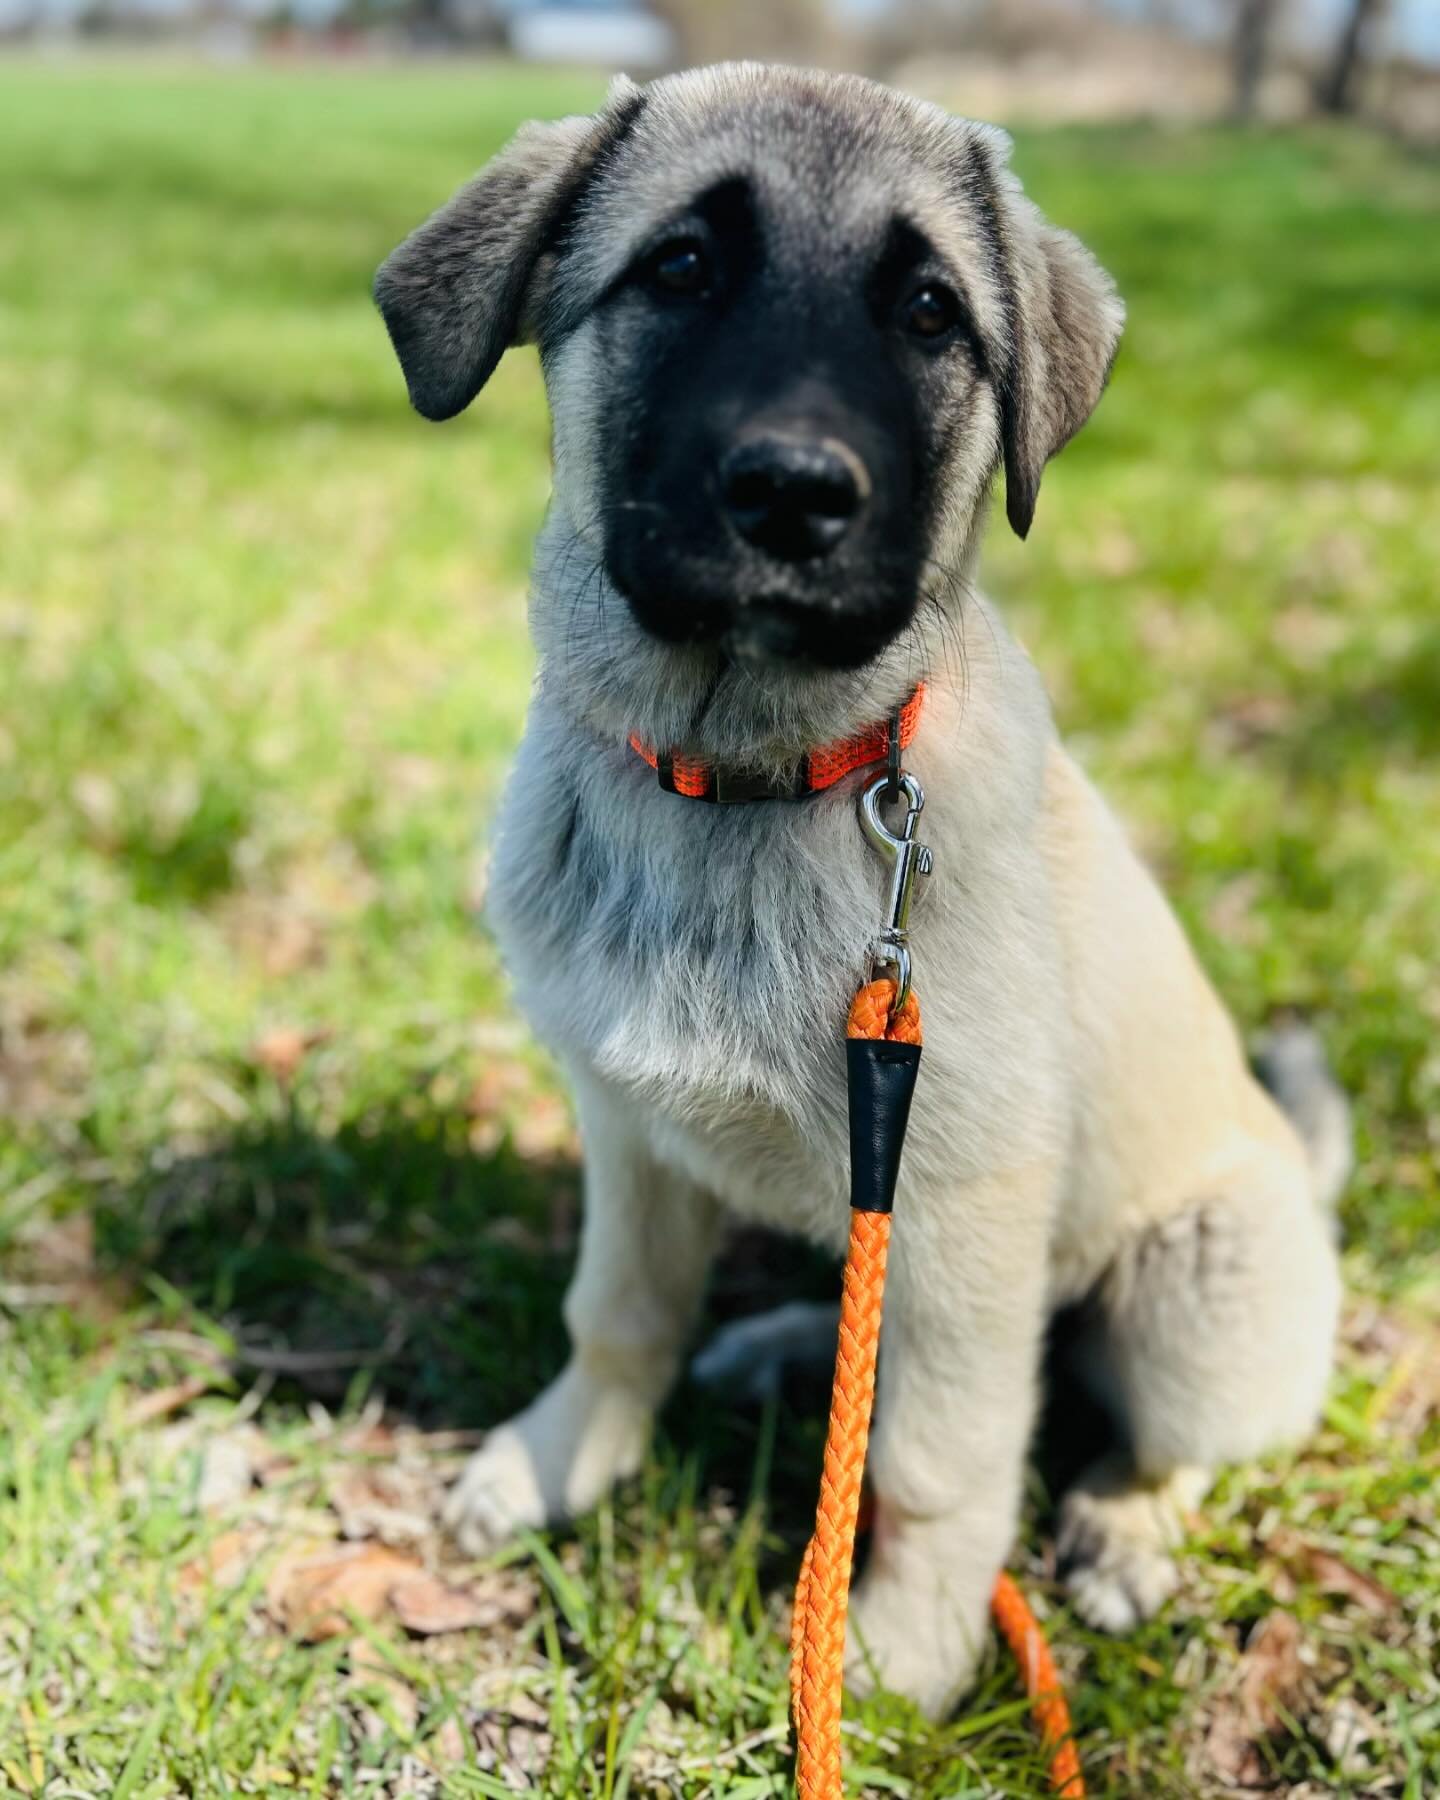 Meet Indy! 

She&rsquo;s an Anatolian Shepard and will have one of the most important jobs on the farm; guarding the livestock.  We couldn&rsquo;t be more excited to have her join our family!  She is so sweet and super curious. 

Thank you to Rick an